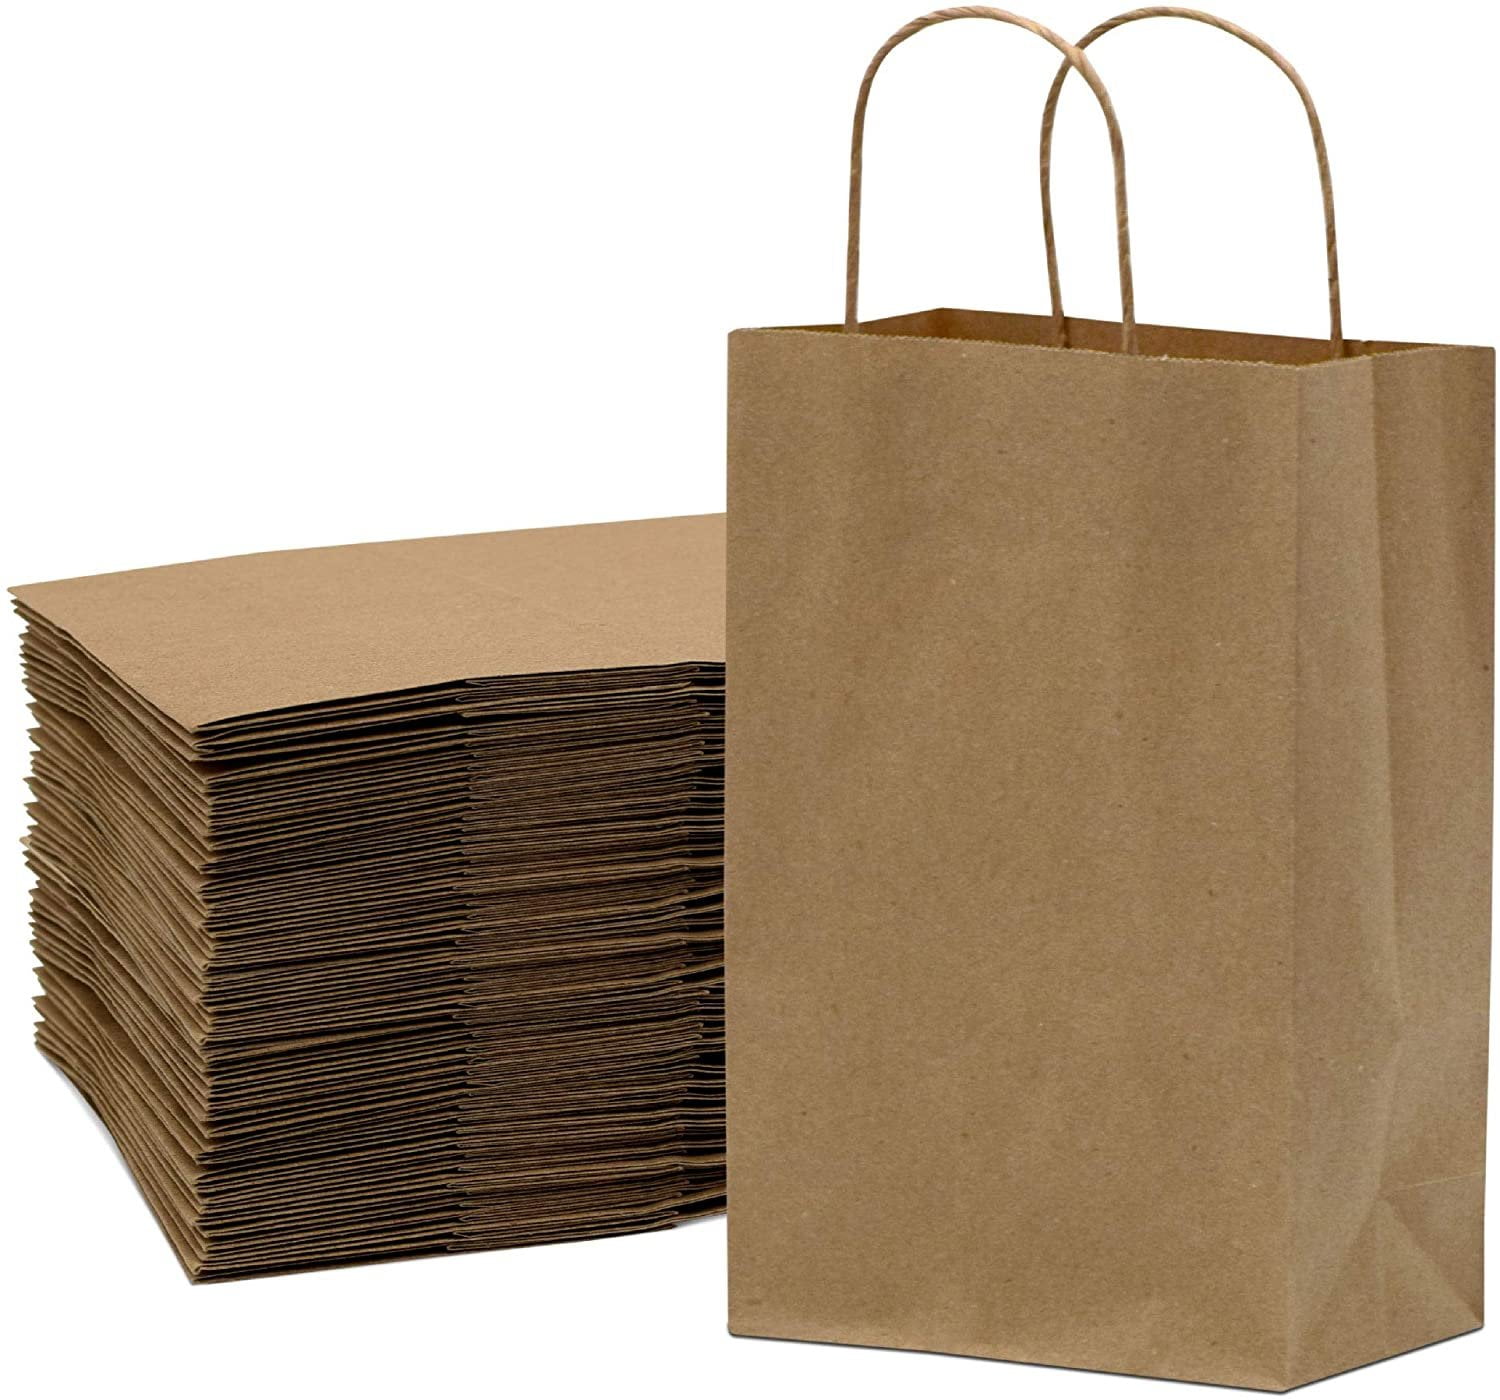 Creative Hobbies Small Kraft Paper Gift Handle Bags - Weddings, Favors, Goody  Bags - Wholesale Pack of 13 Bags : Amazon.in: Home & Kitchen